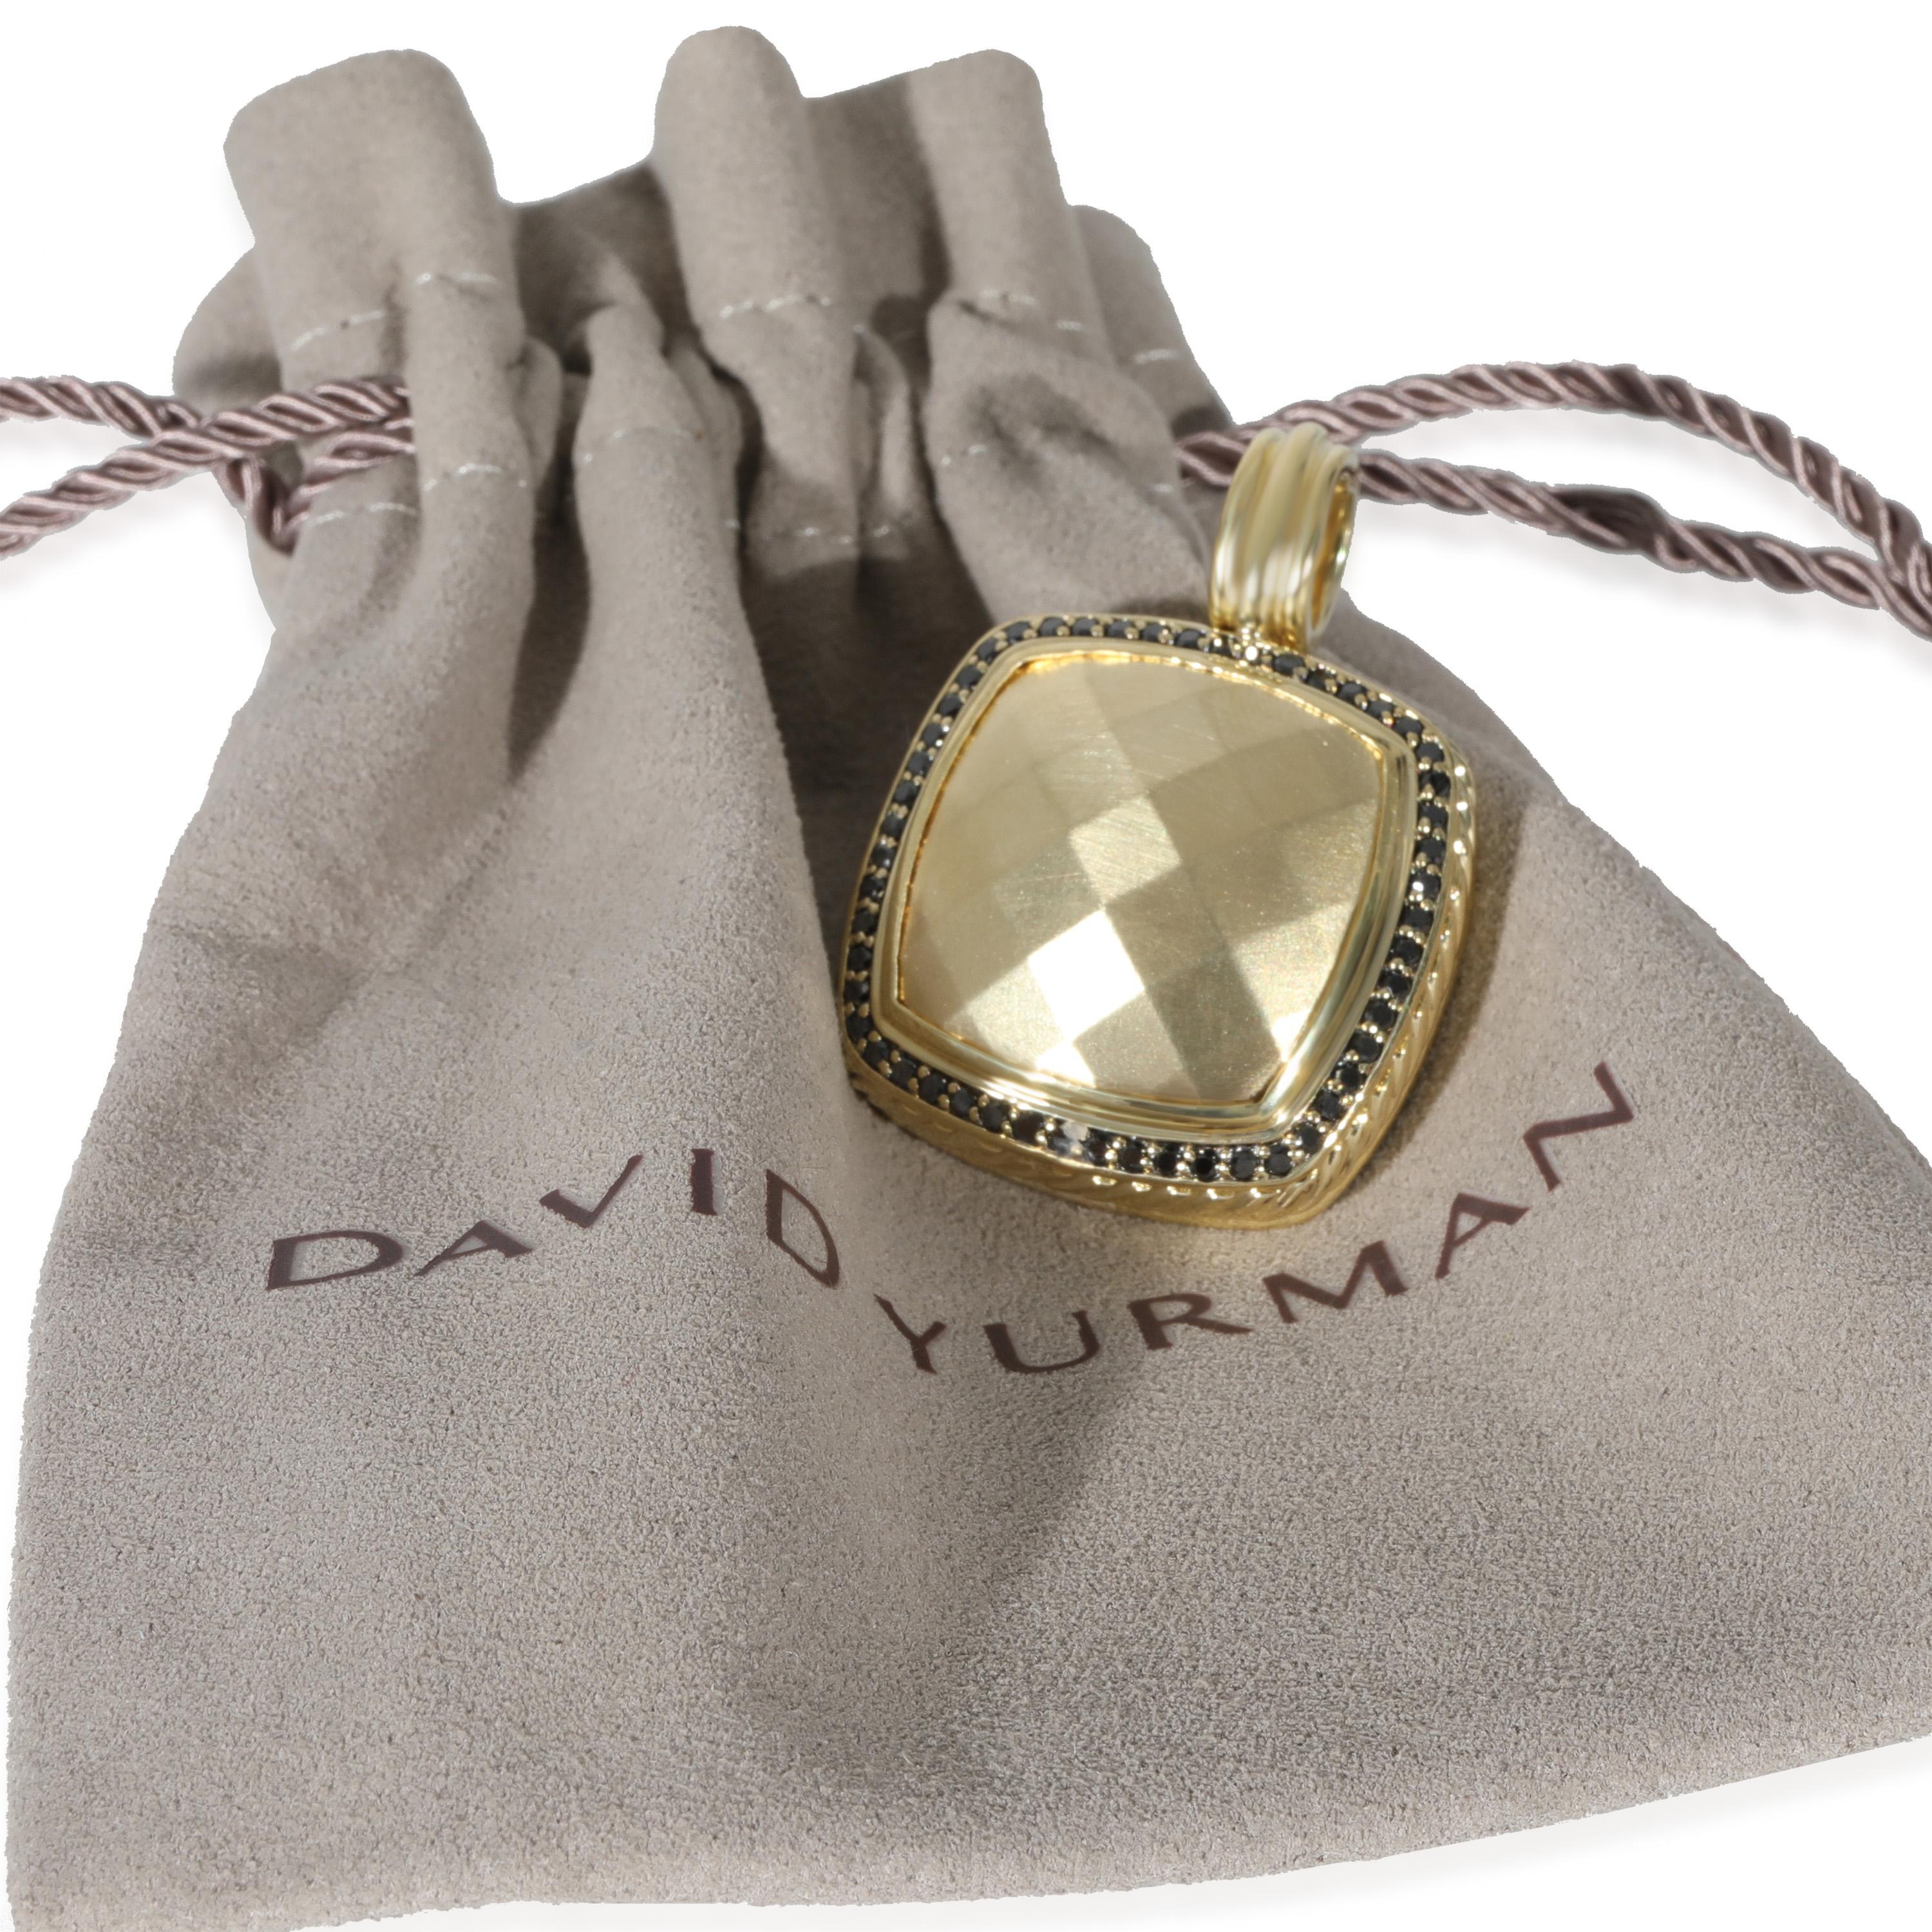 David Yurman Albion Black Diamond Pendant in 18k Yellow Gold 0.5 CTW In Excellent Condition For Sale In New York, NY